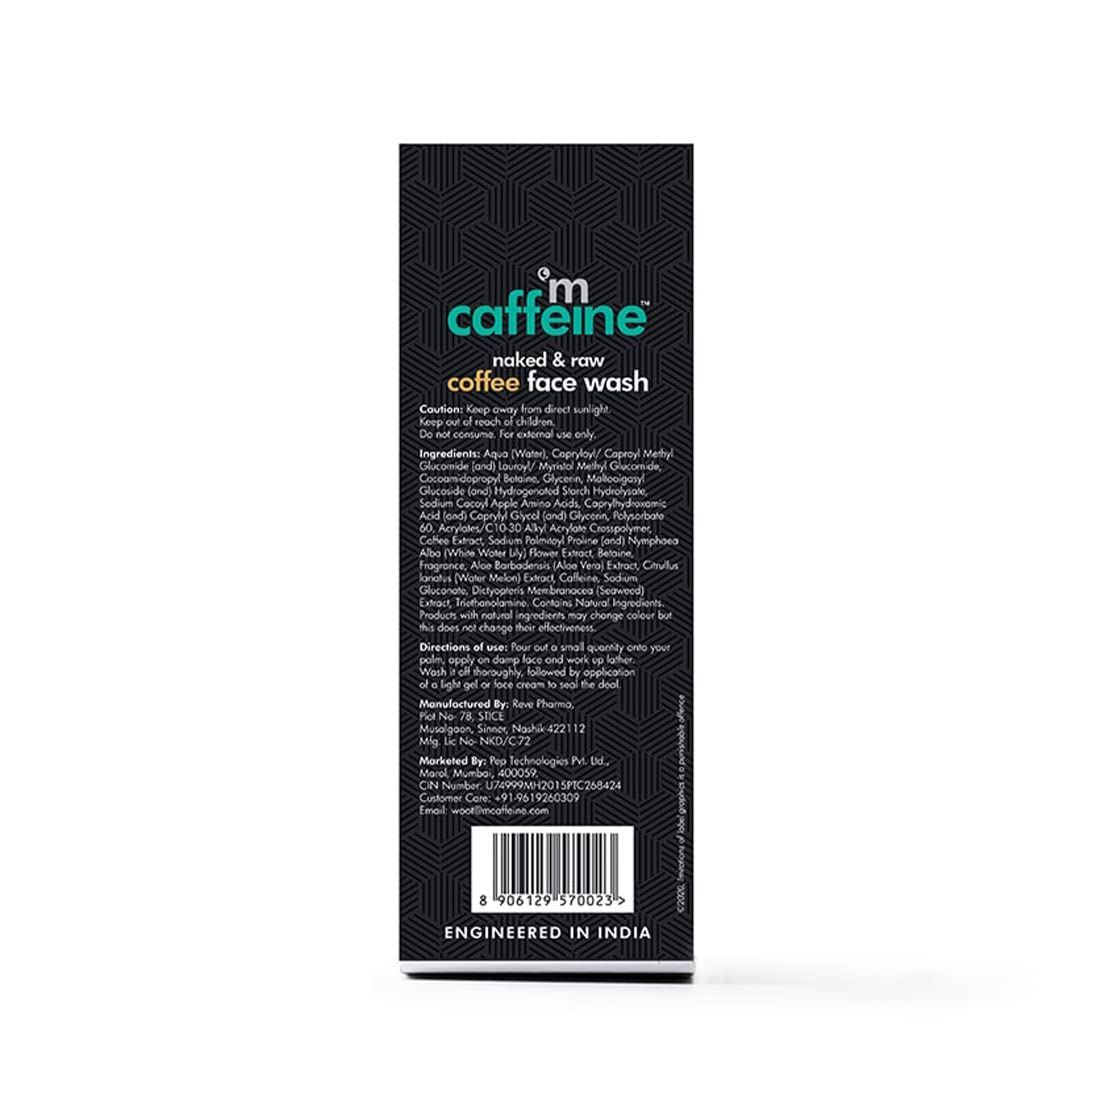 Naked & Raw Coffee Face Wash - 100ml